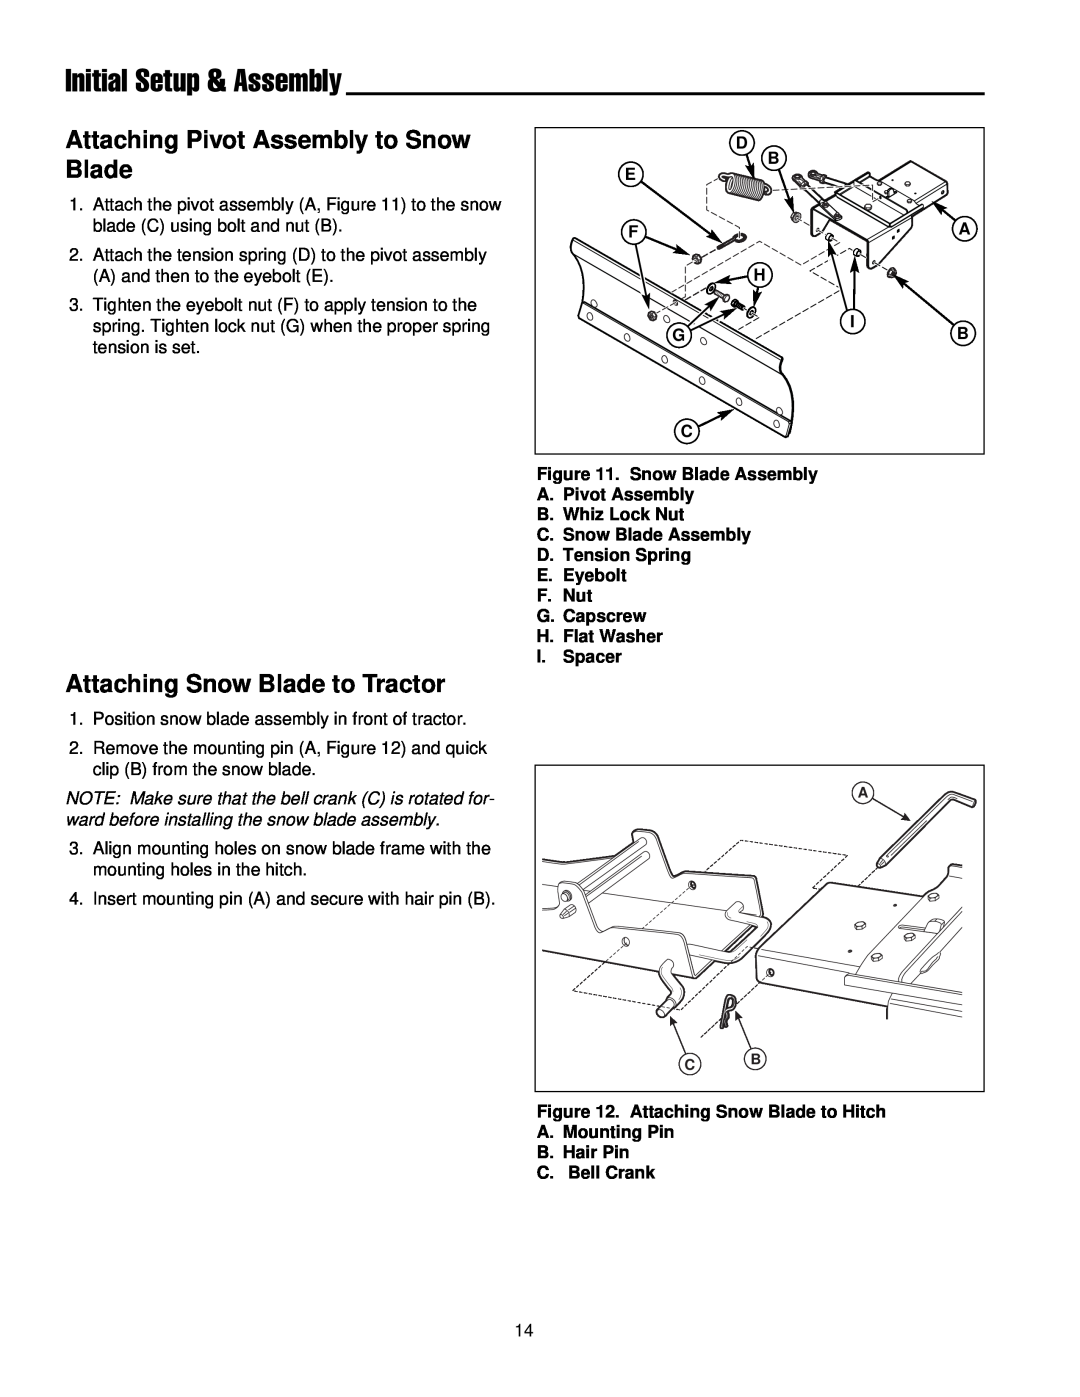 Briggs & Stratton 1694919 manual Attaching Pivot Assembly to Snow Blade, Attaching Snow Blade to Tractor, C. Bell Crank 